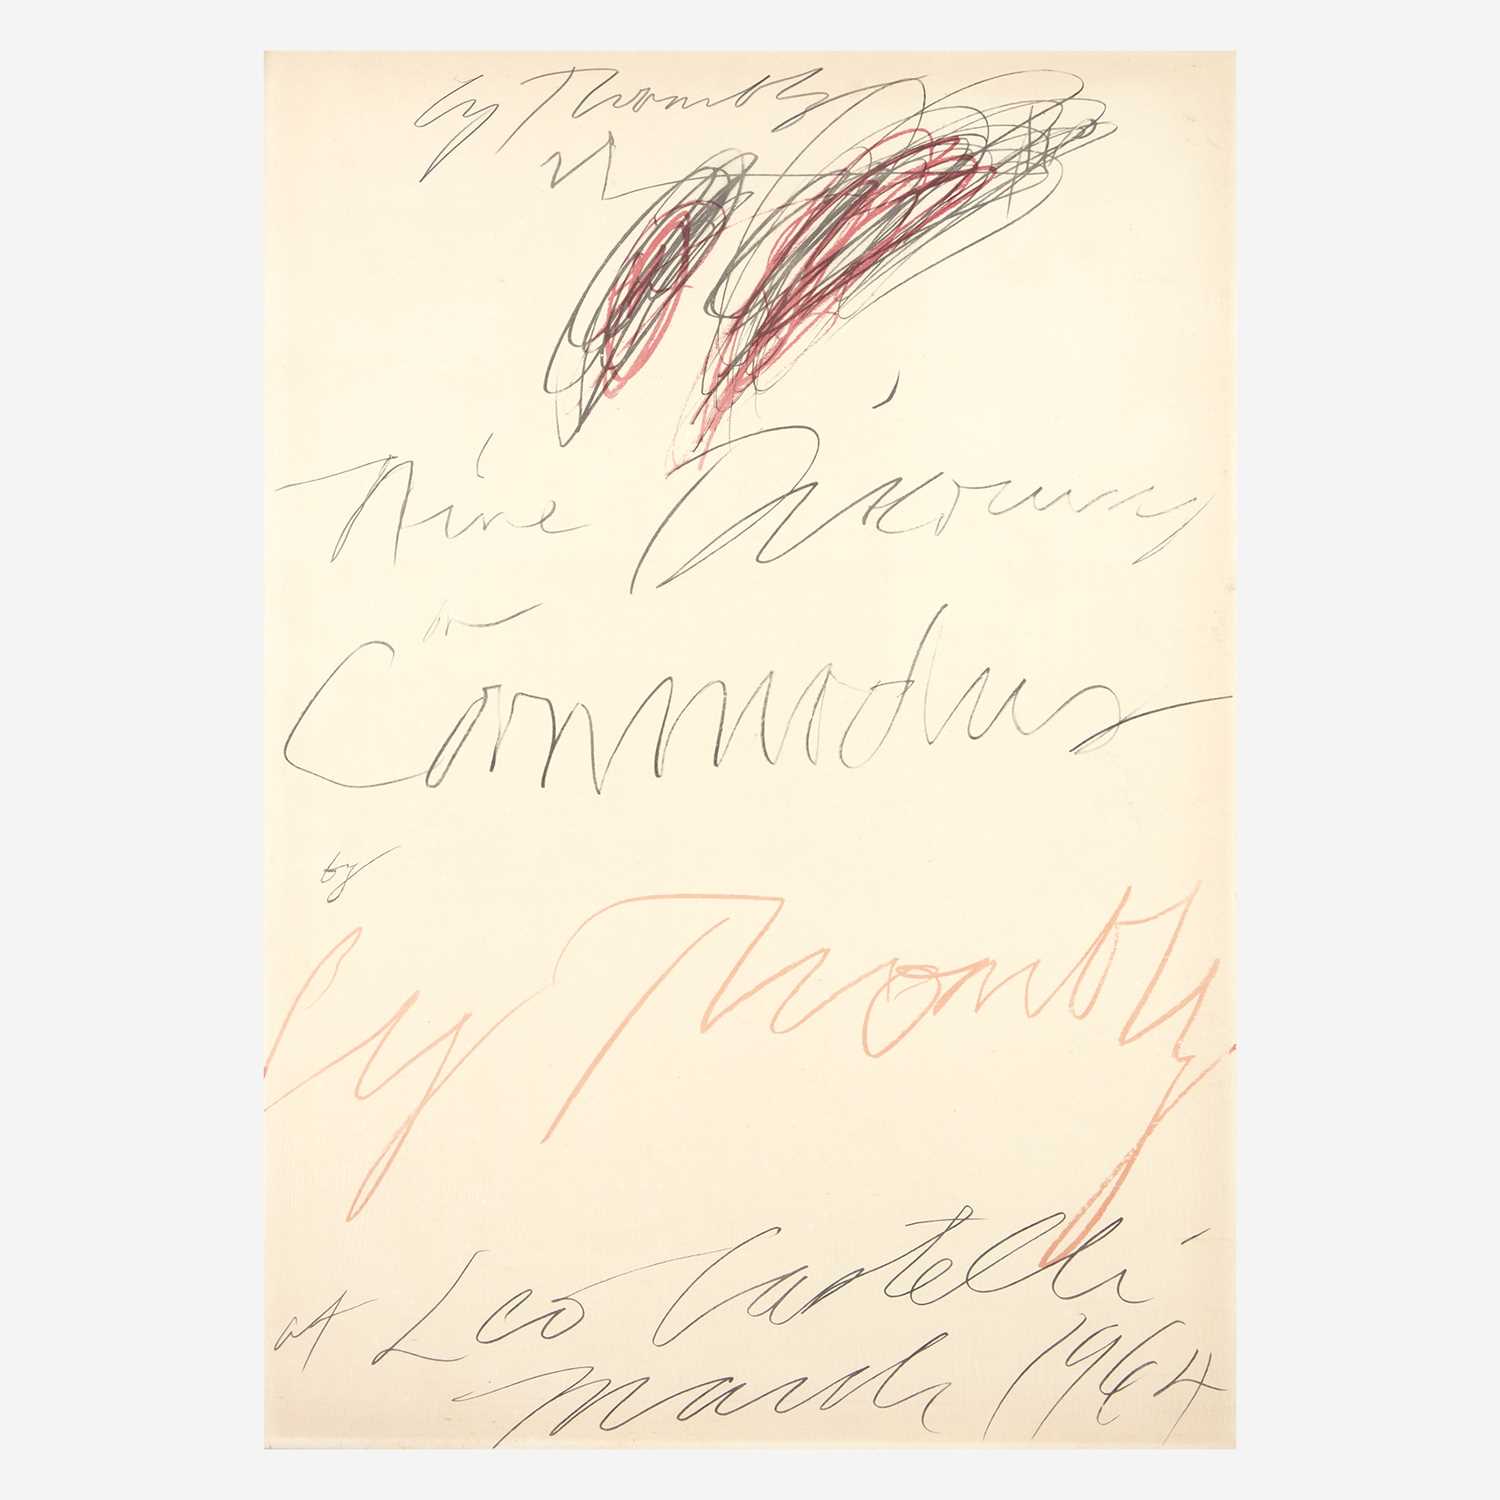 Lot 27 - [Art] Twombly, Cy